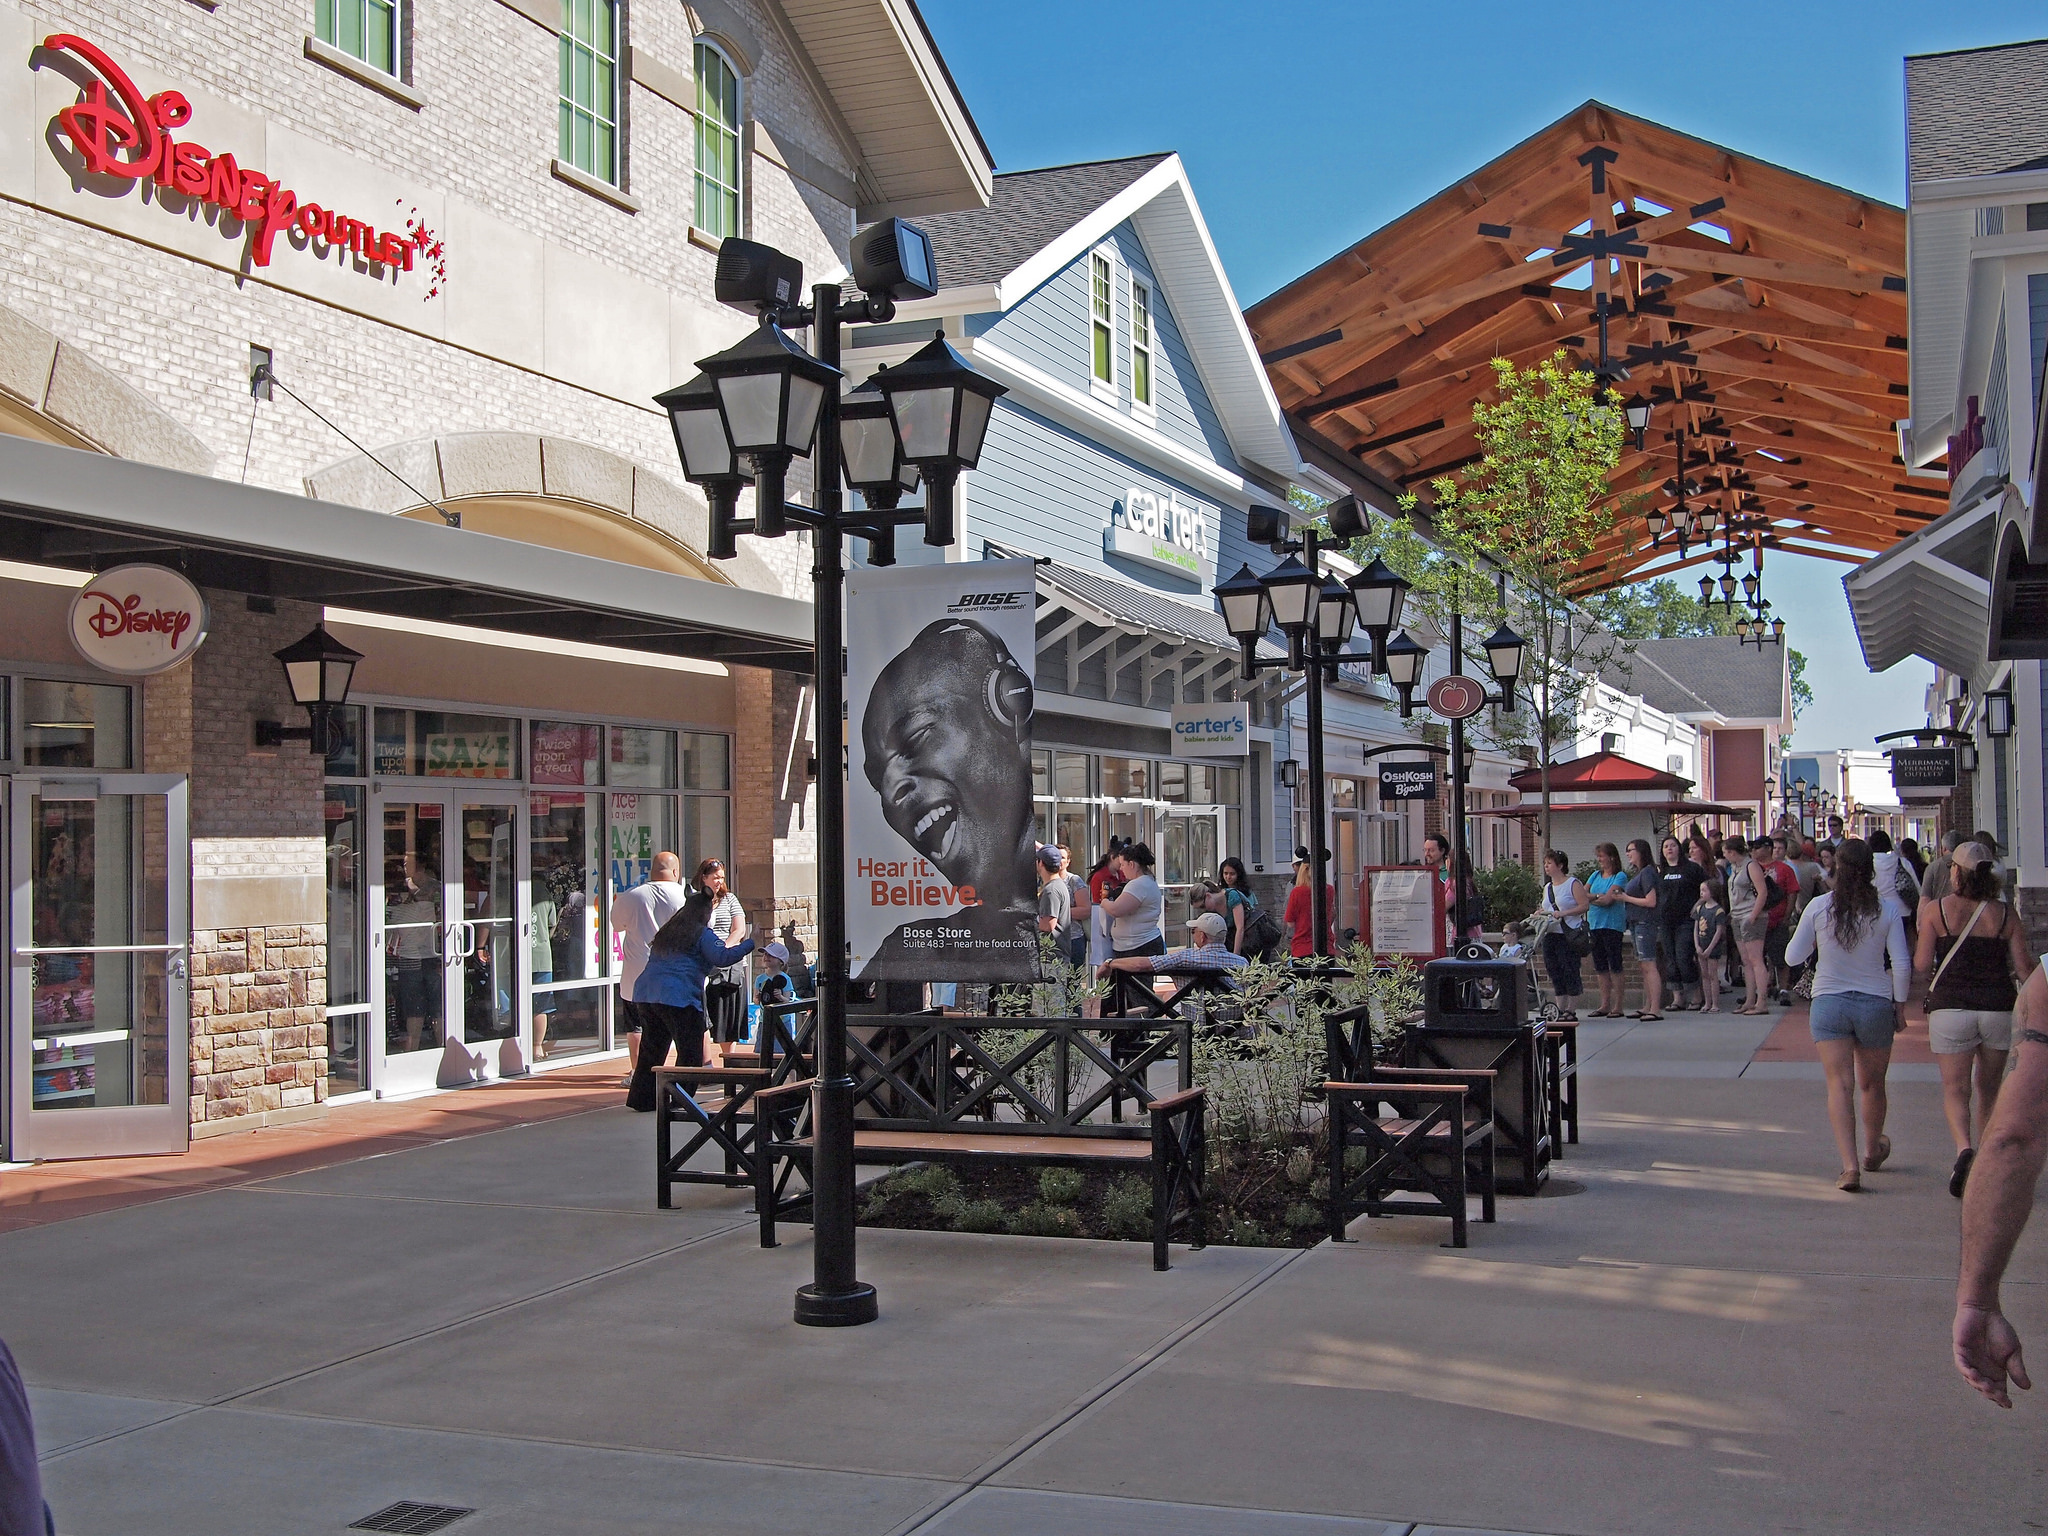 The Merrimack Premium Outlets in Merrimack, New Hampshire make a popular shopping destination in New England for Black Friday.